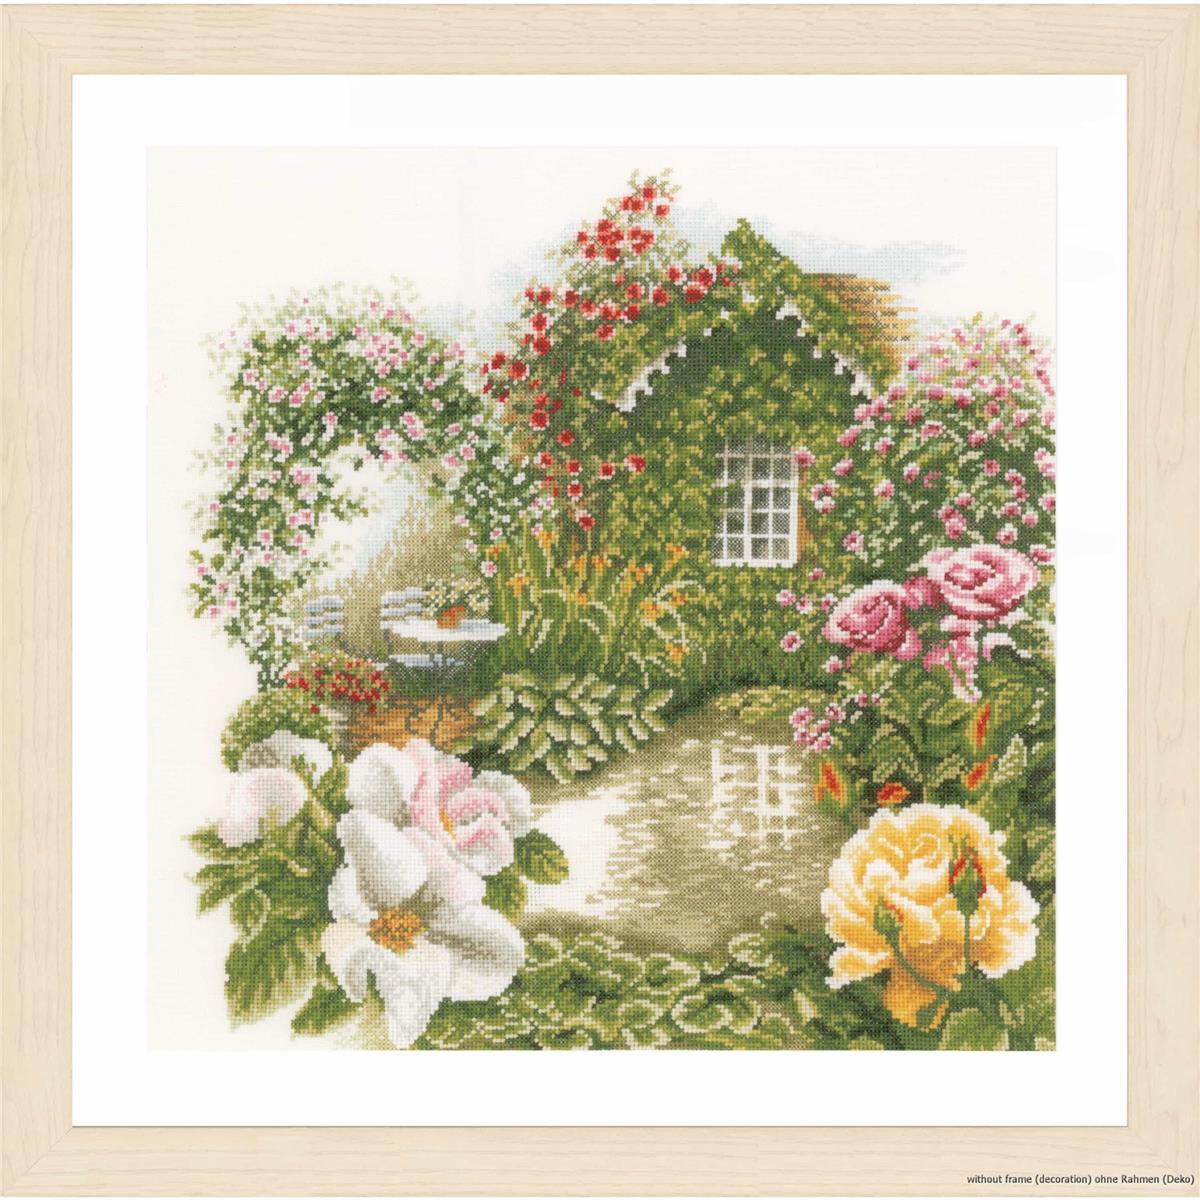 A framed picture in a Lanarte embroidery pack design...